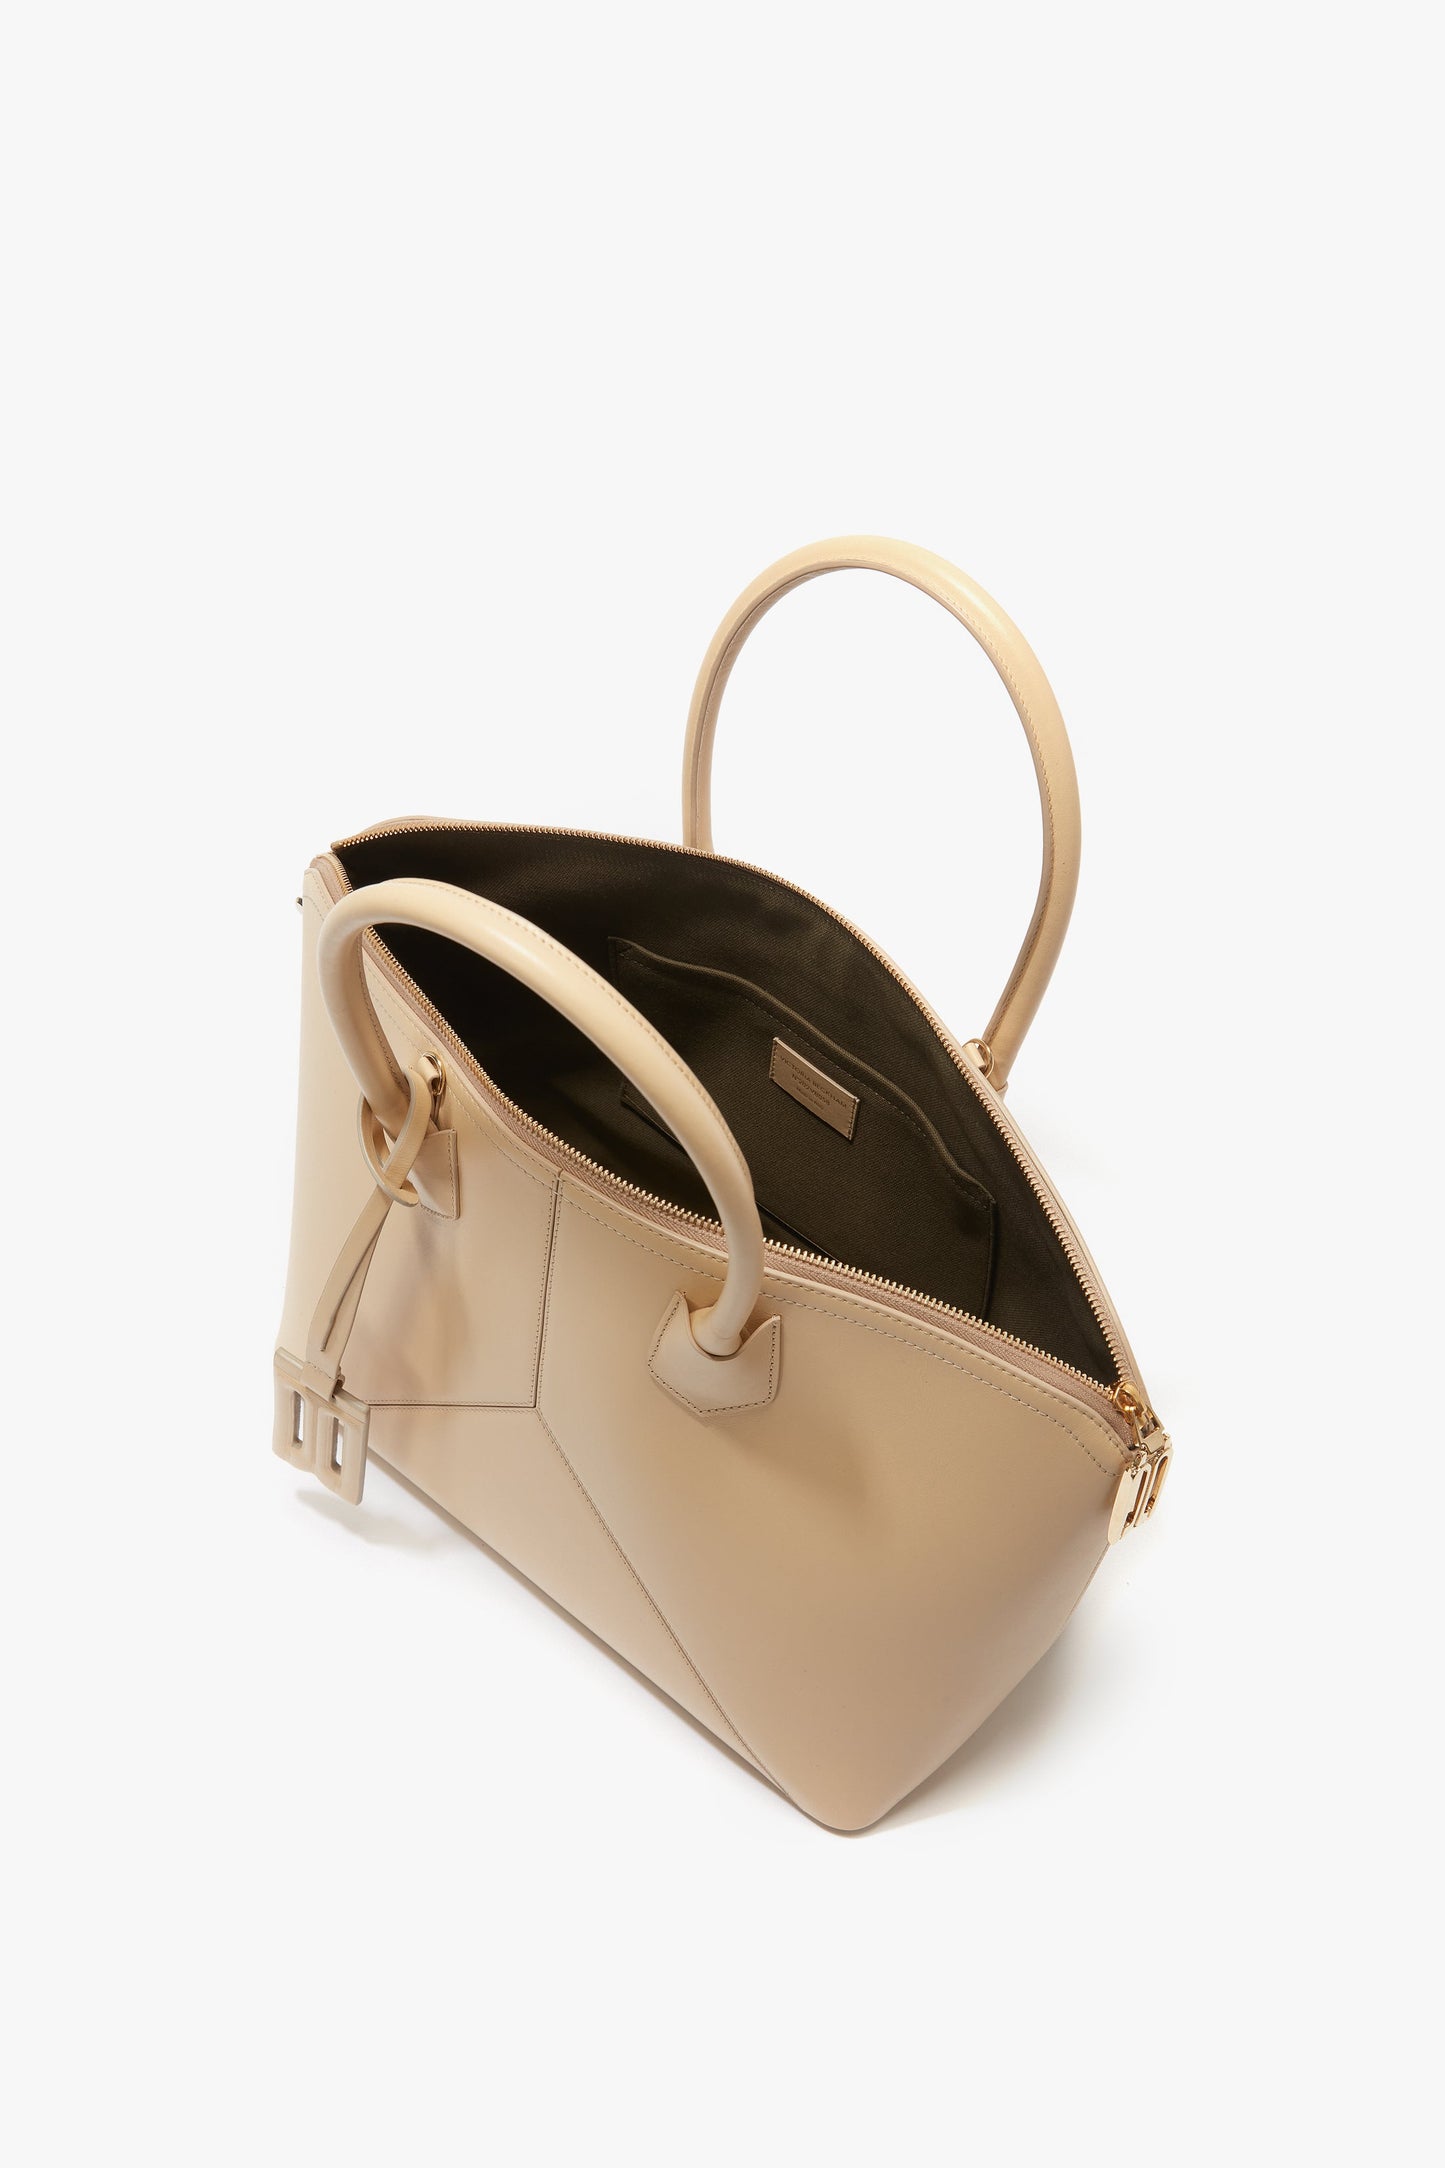 The Victoria Beckham Victoria Bag In Sesame Leather boasts sophisticated leather panels, two handles, and an open zipper. Its spacious interior includes a small inner compartment and elegant side buckle details. Plus, it features an adjustable strap for added versatility.